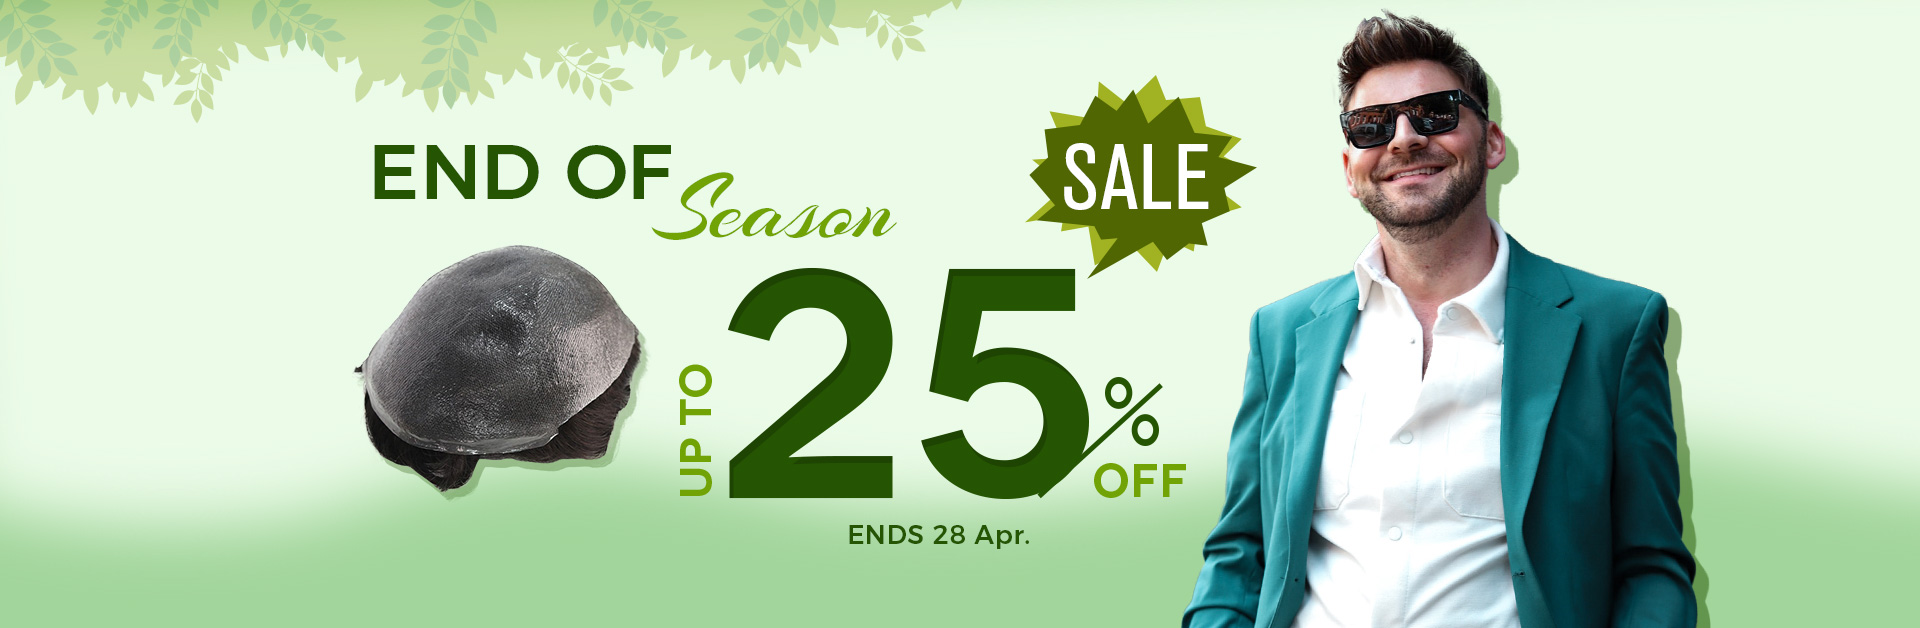 END OF SEASON SALE Up to 25% OFF ENDS 28 Apr. 